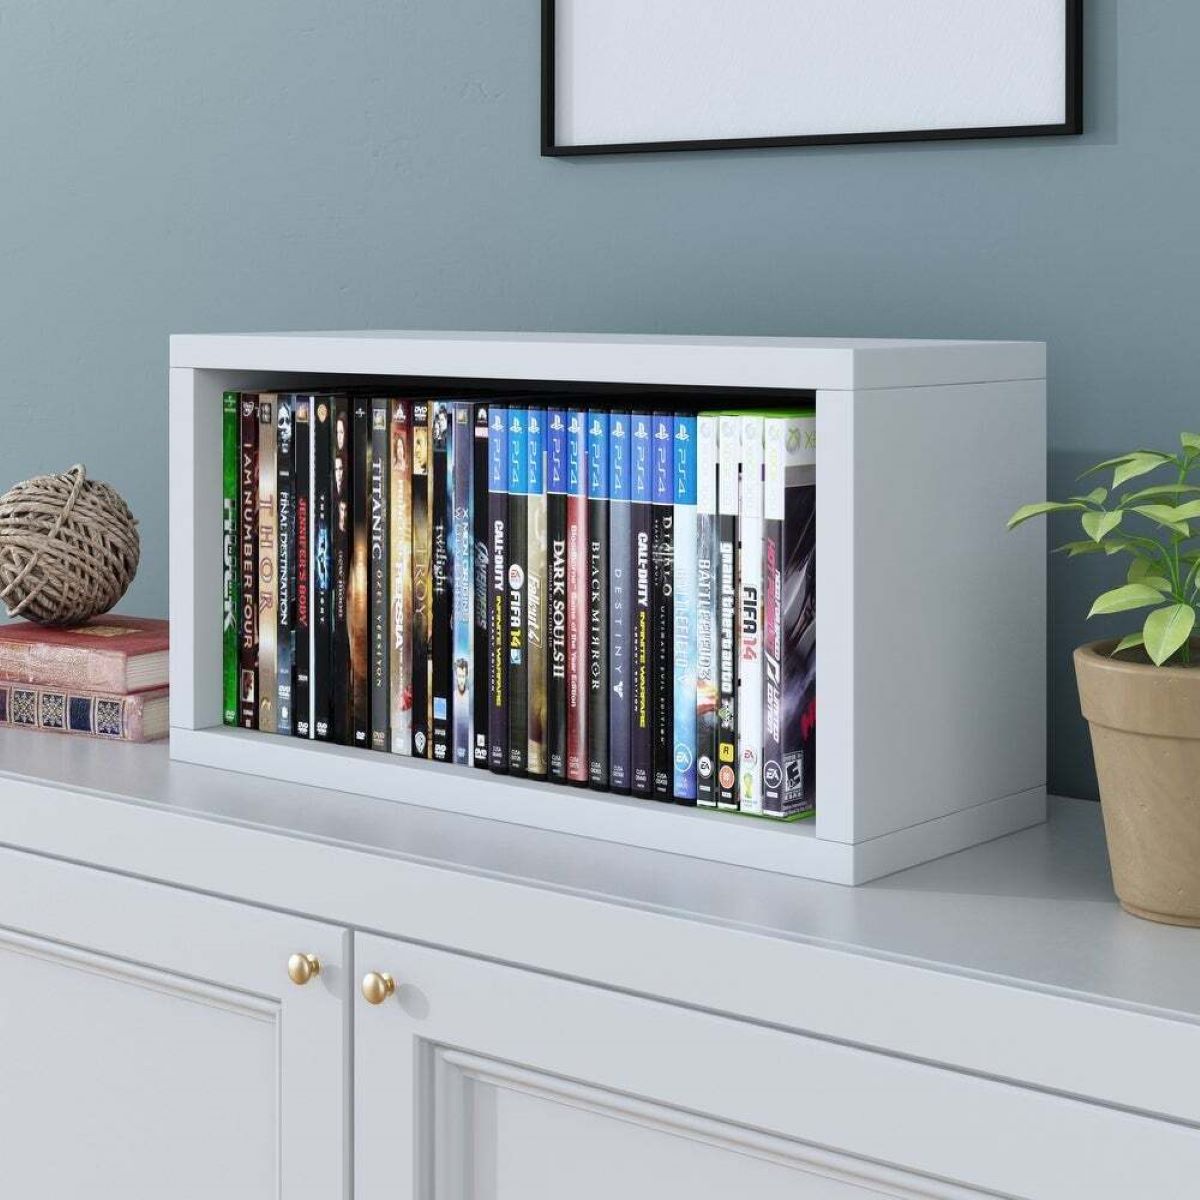 How To Store DVDs For A Minimalist Home